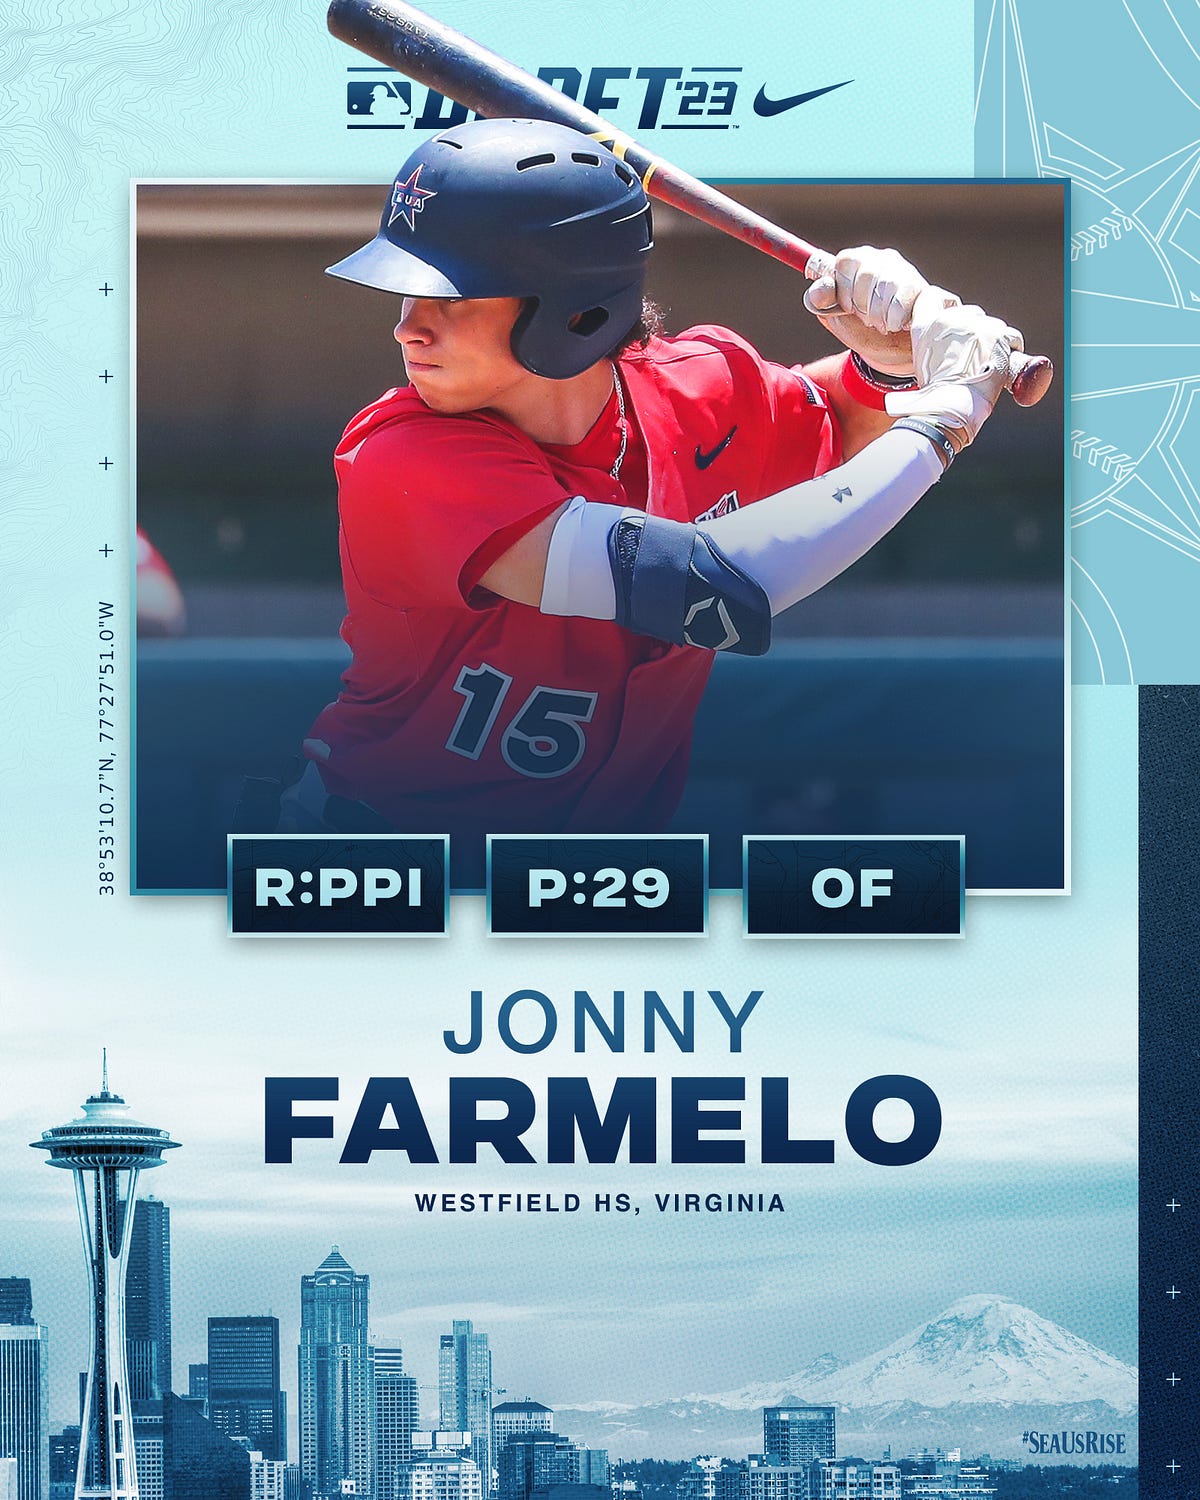 Mariners Select OF Jonny Farmelo 29th Overall in the 2023 MLB Draft by Mariners PR From the Corner of Edgar and Dave